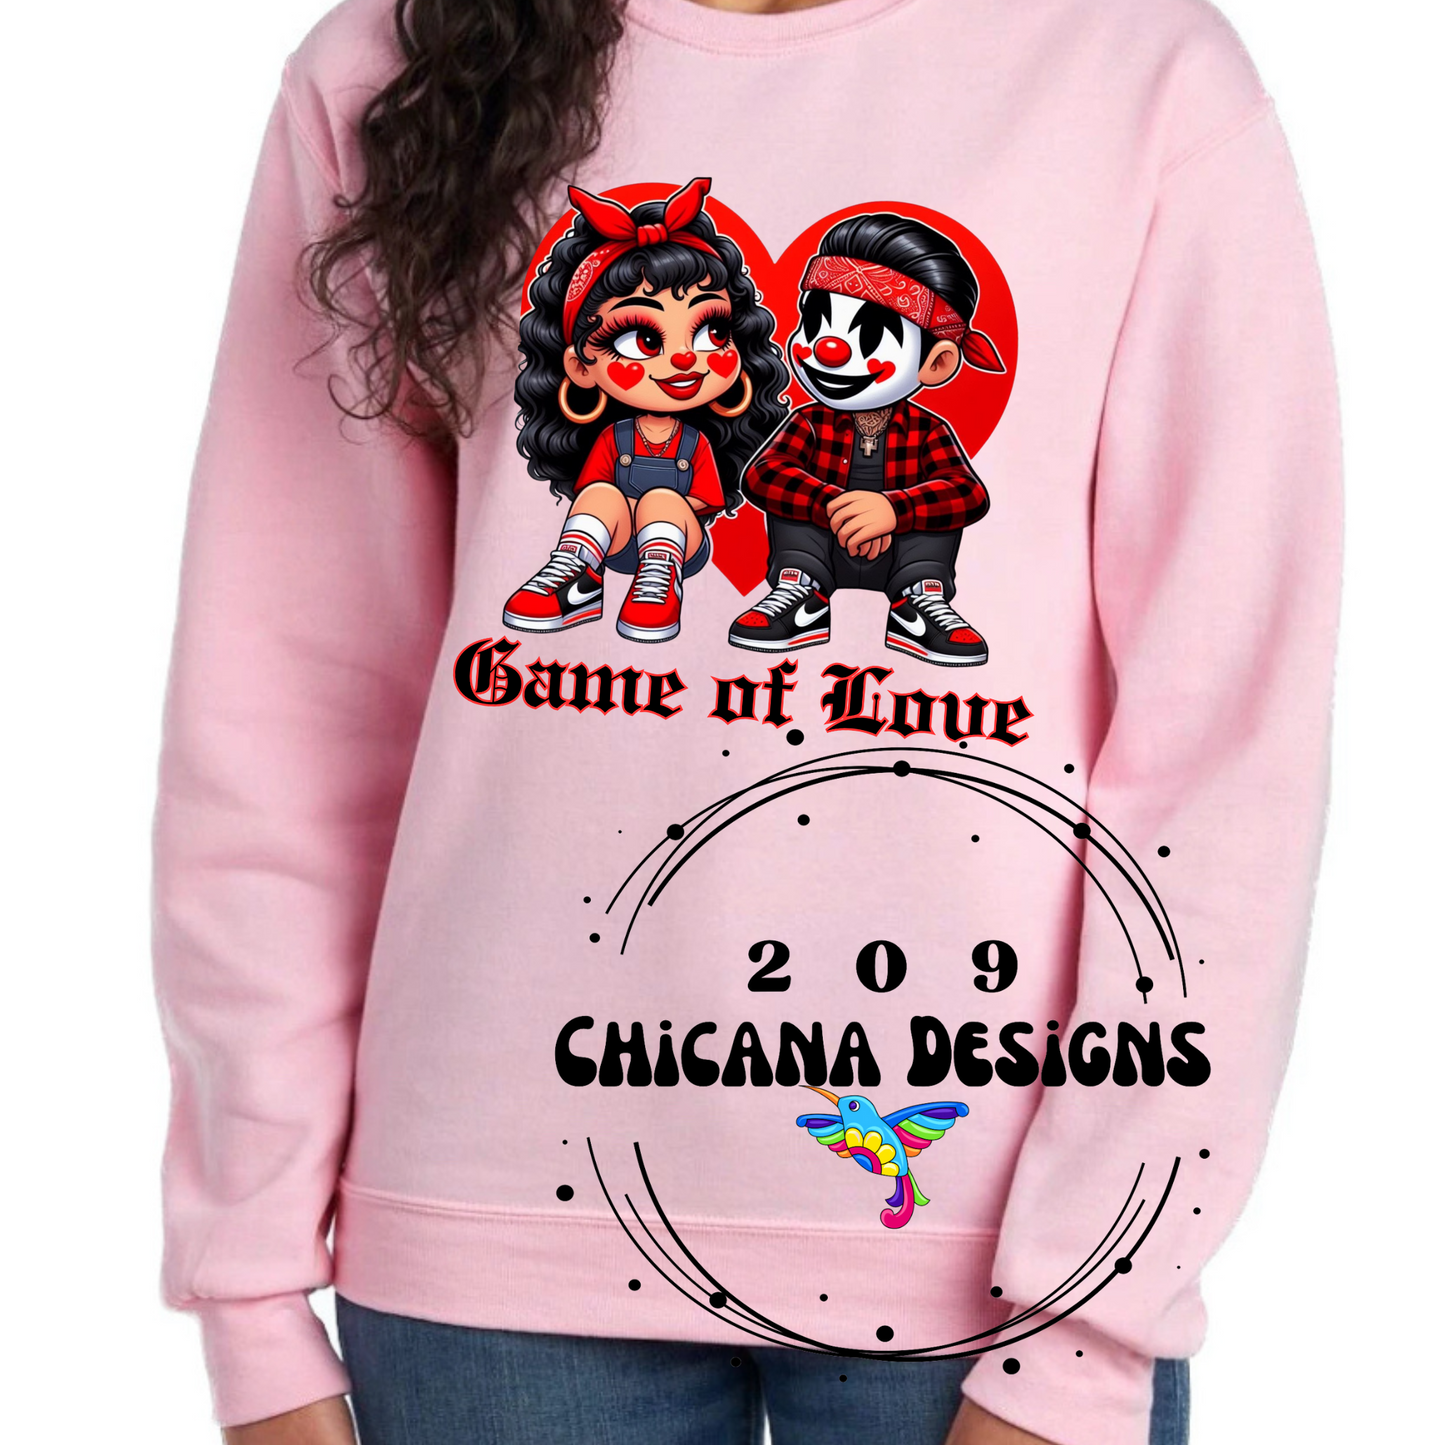 Game of Love oldies Chicano Love crewneck sweater